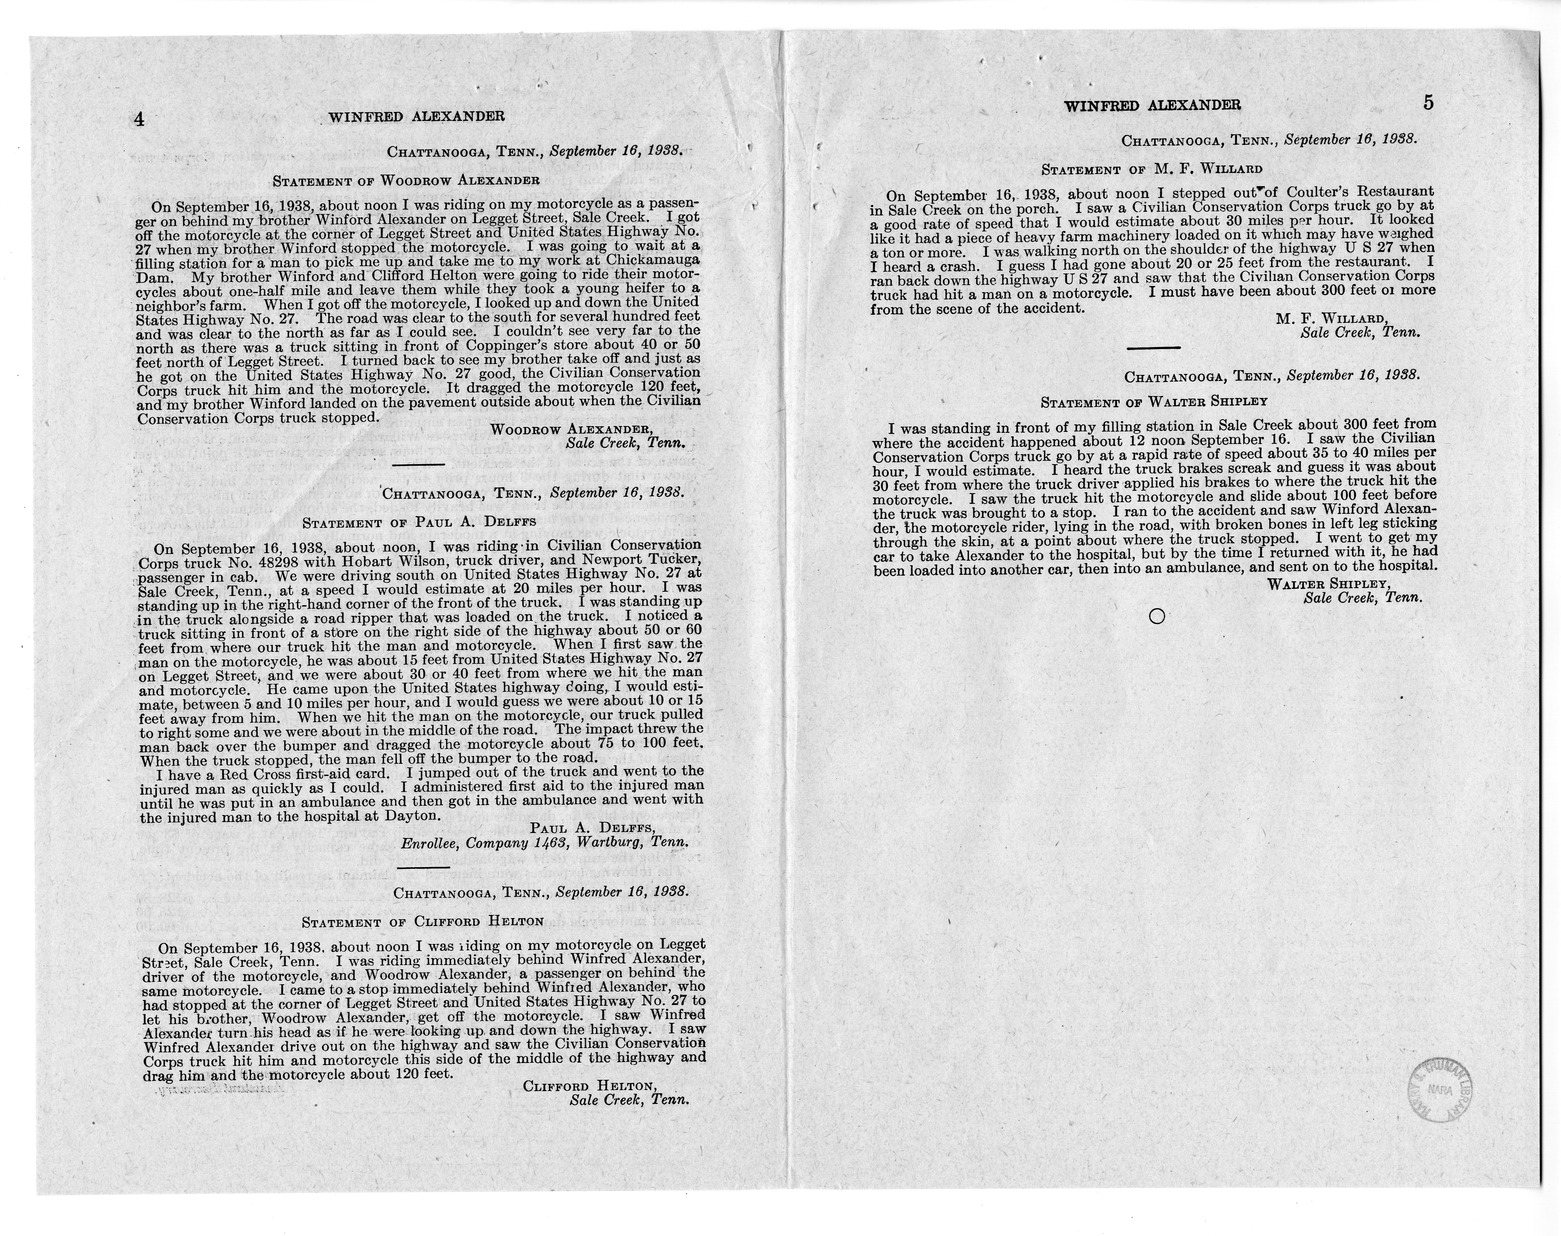 Memorandum from Frederick J. Bailey to M. C. Latta, H.R. 938, For the Relief of Winfred Alexander, with Attachments